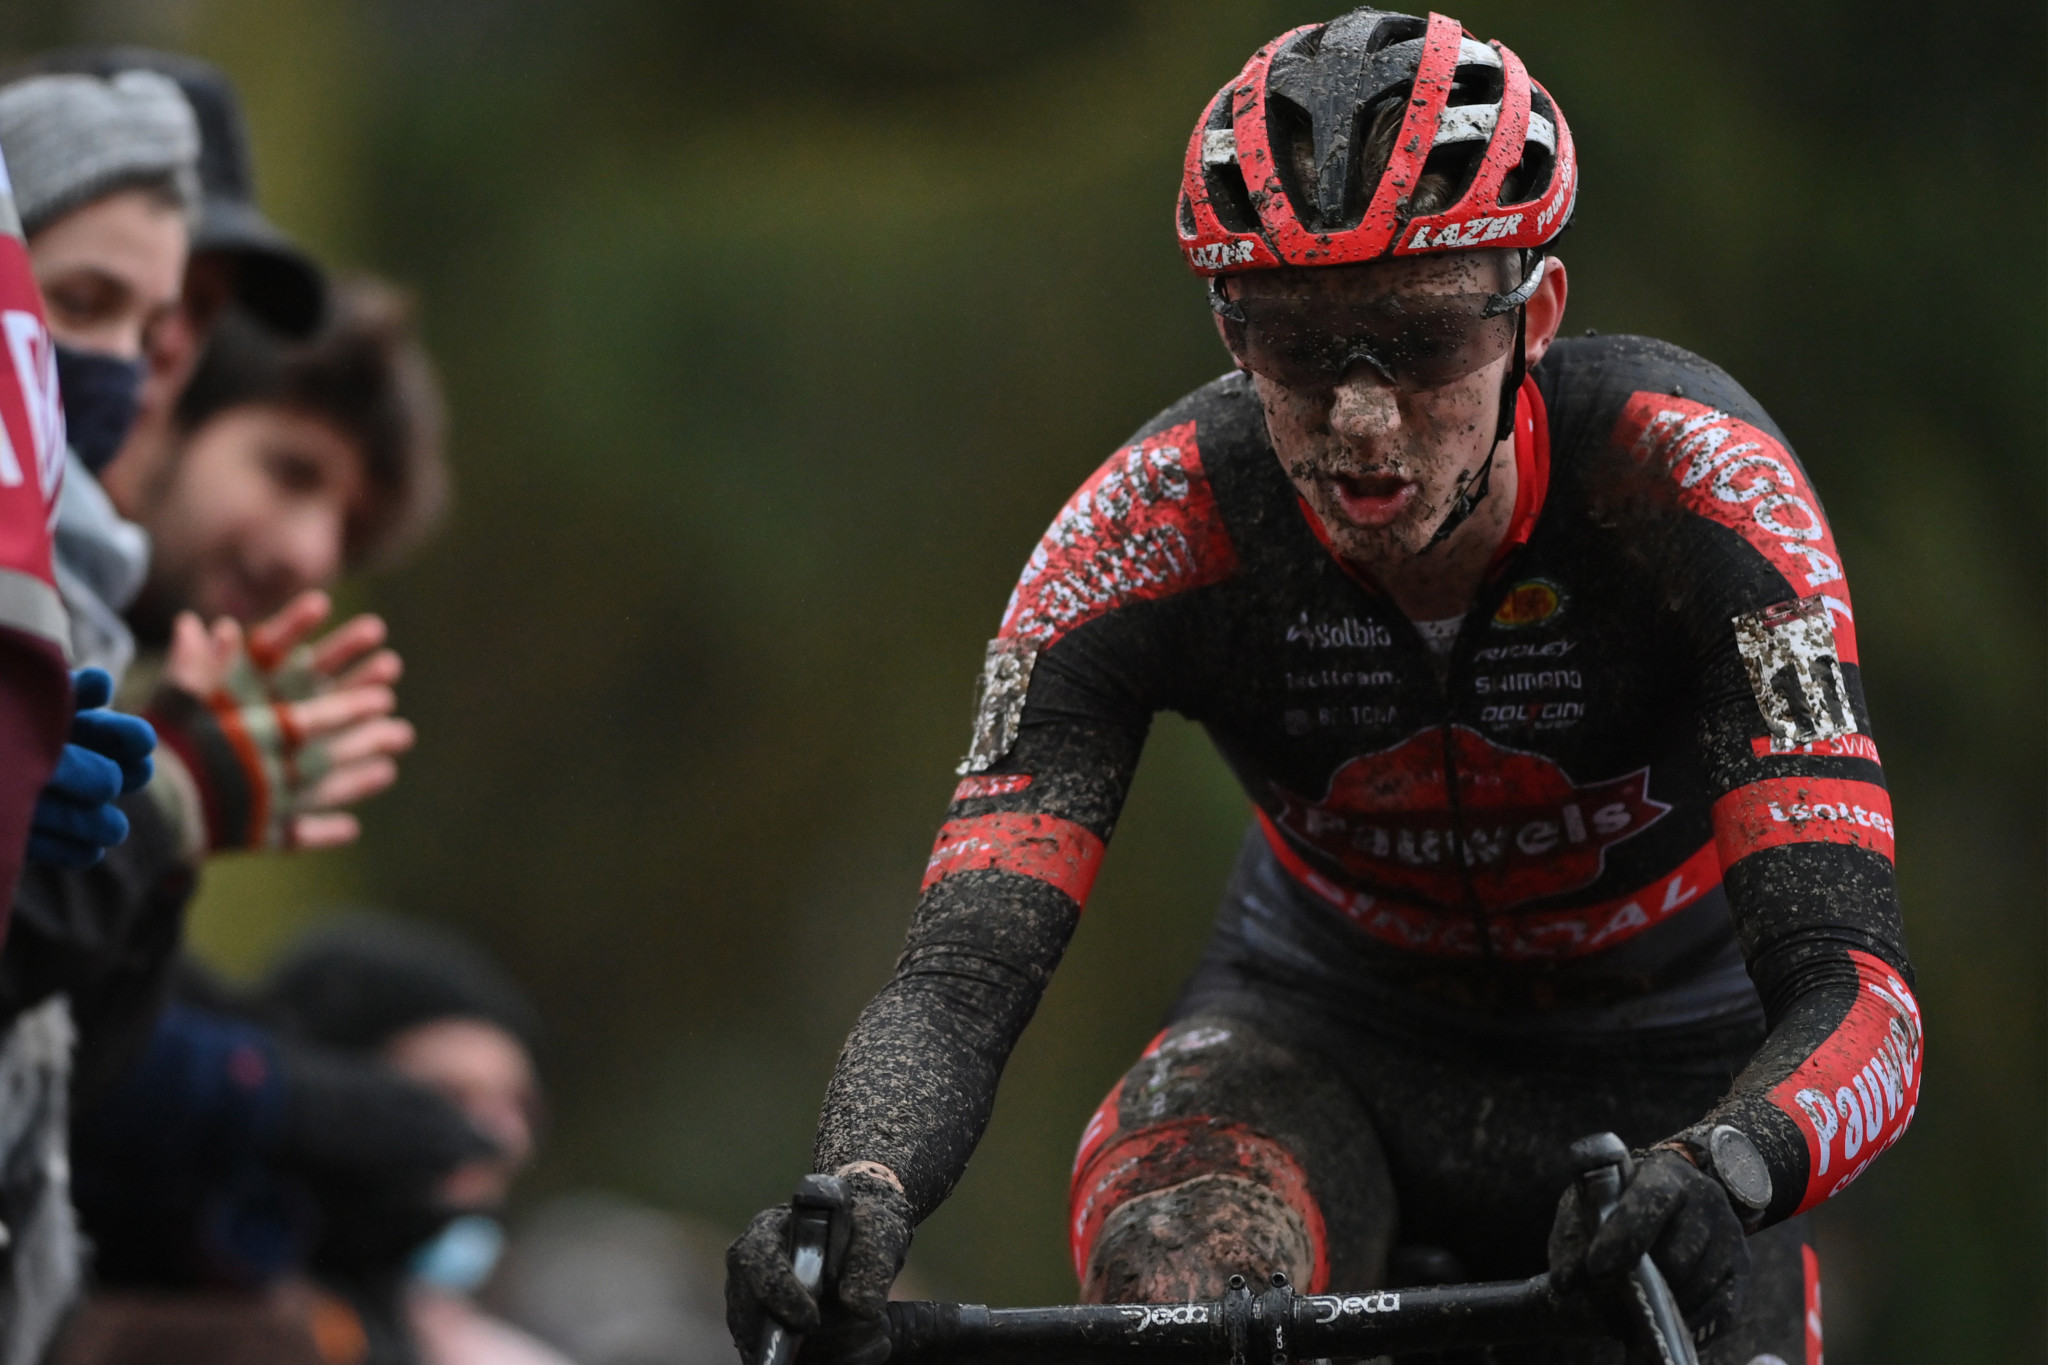 Vanthourenhout and Brand earn Cyclo-cross World Cup honours in Namur